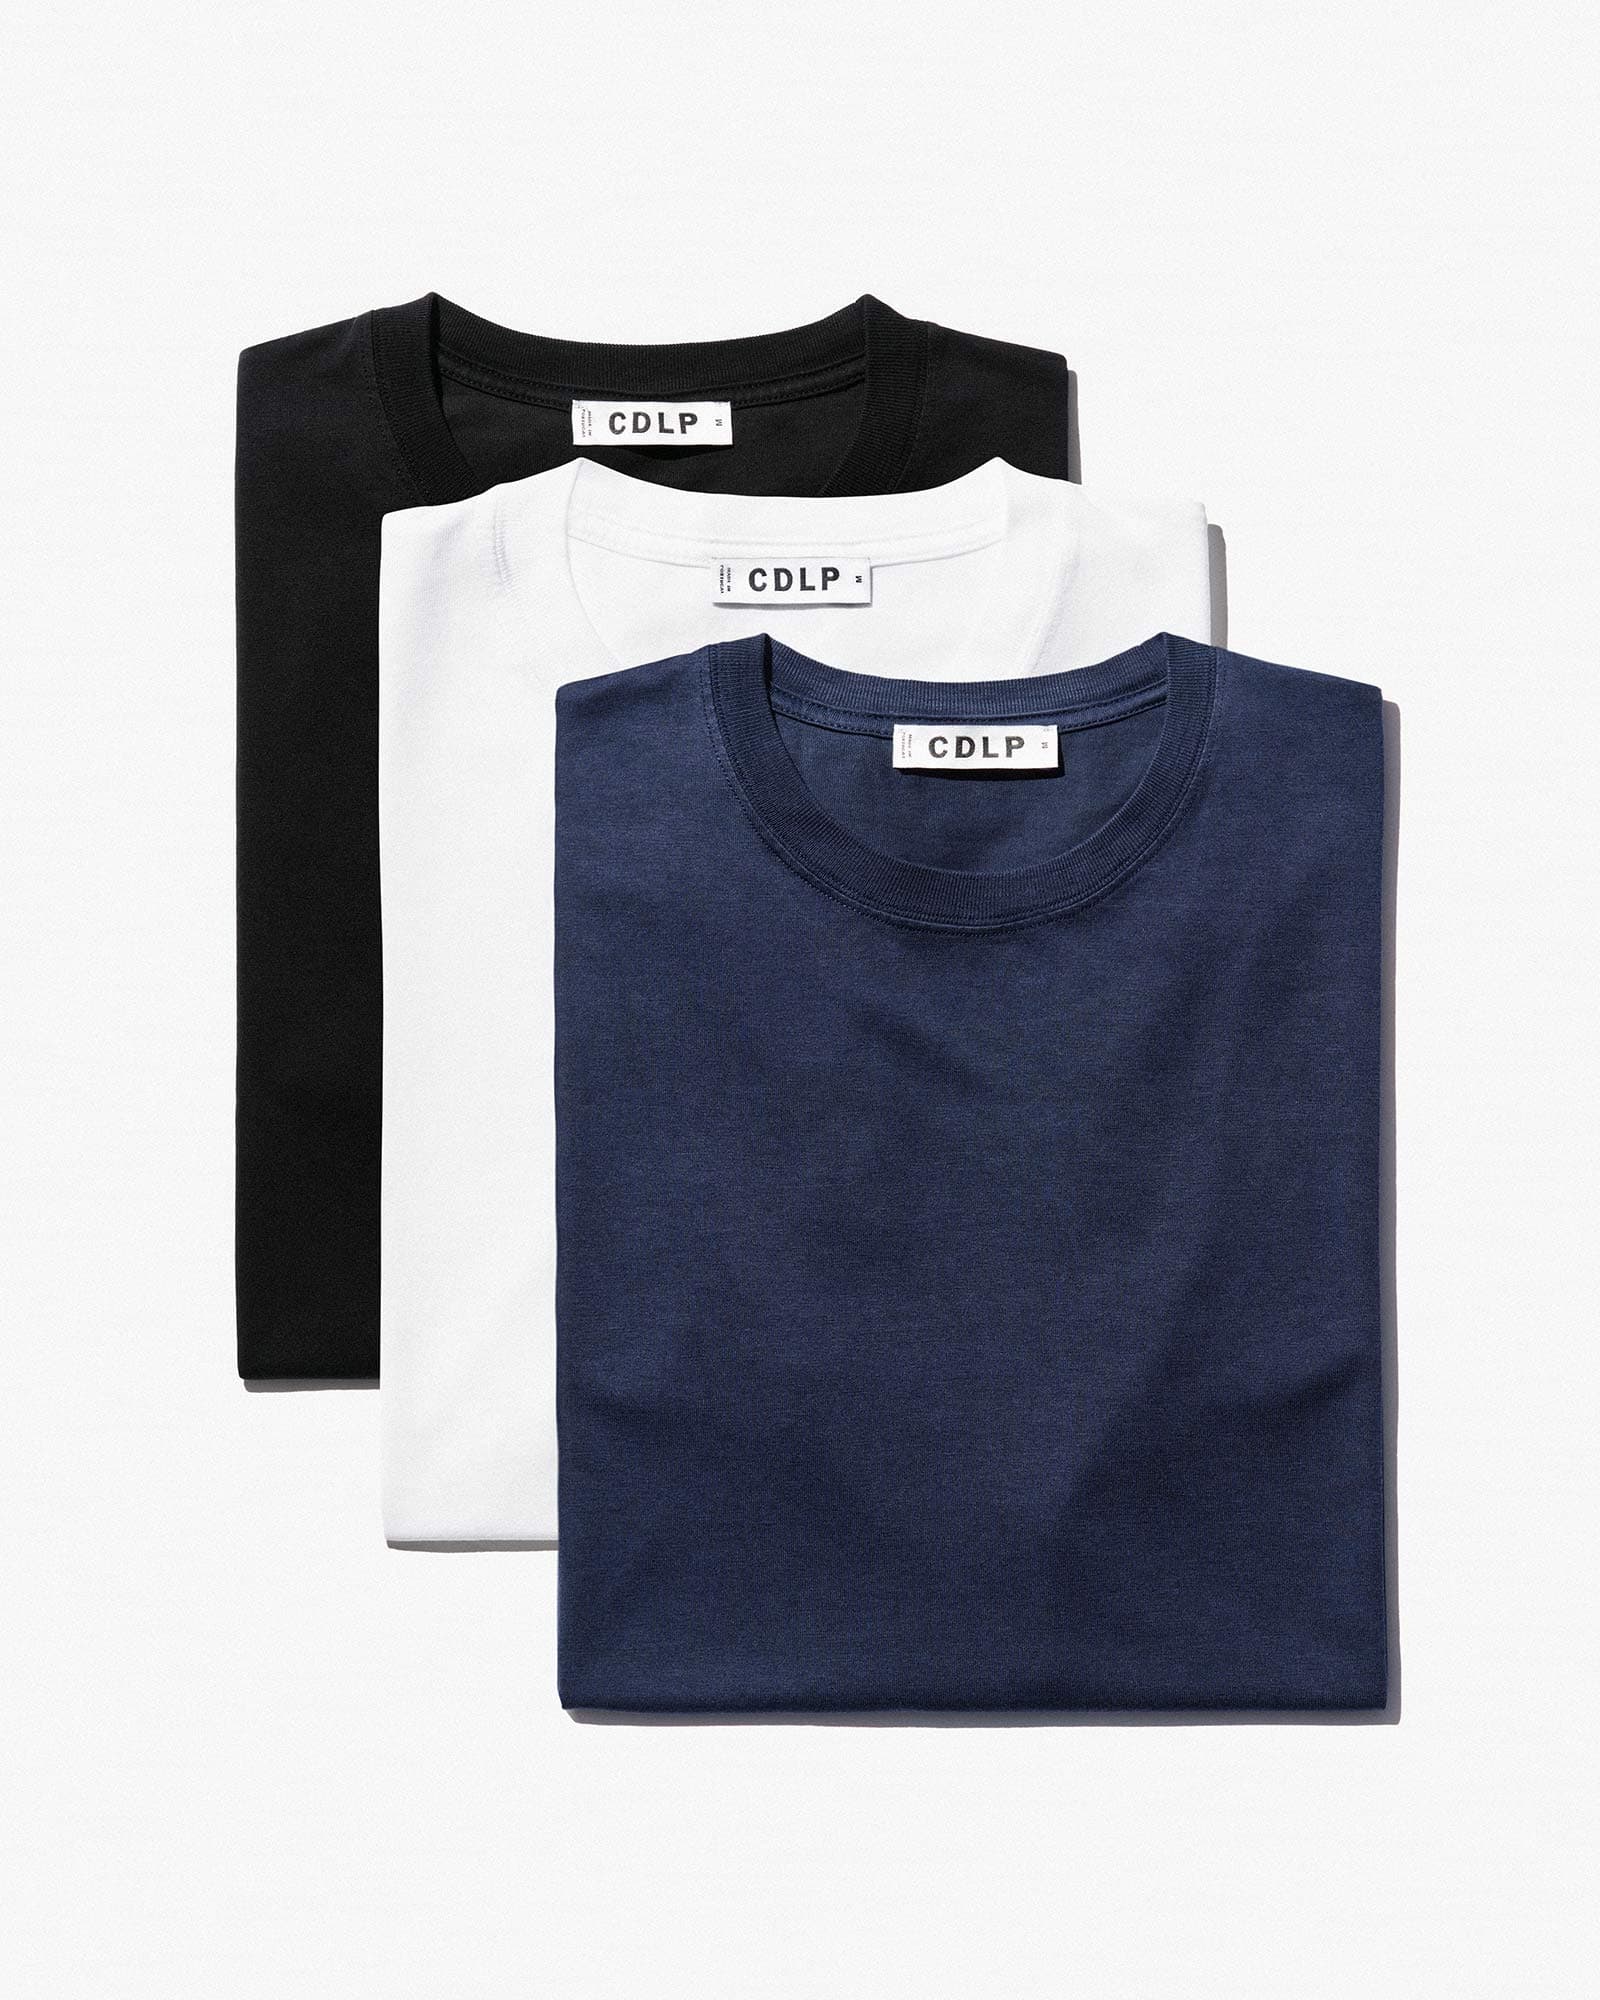 3 × Midweight T-Shirt in Navy Blue Black | Shop now –